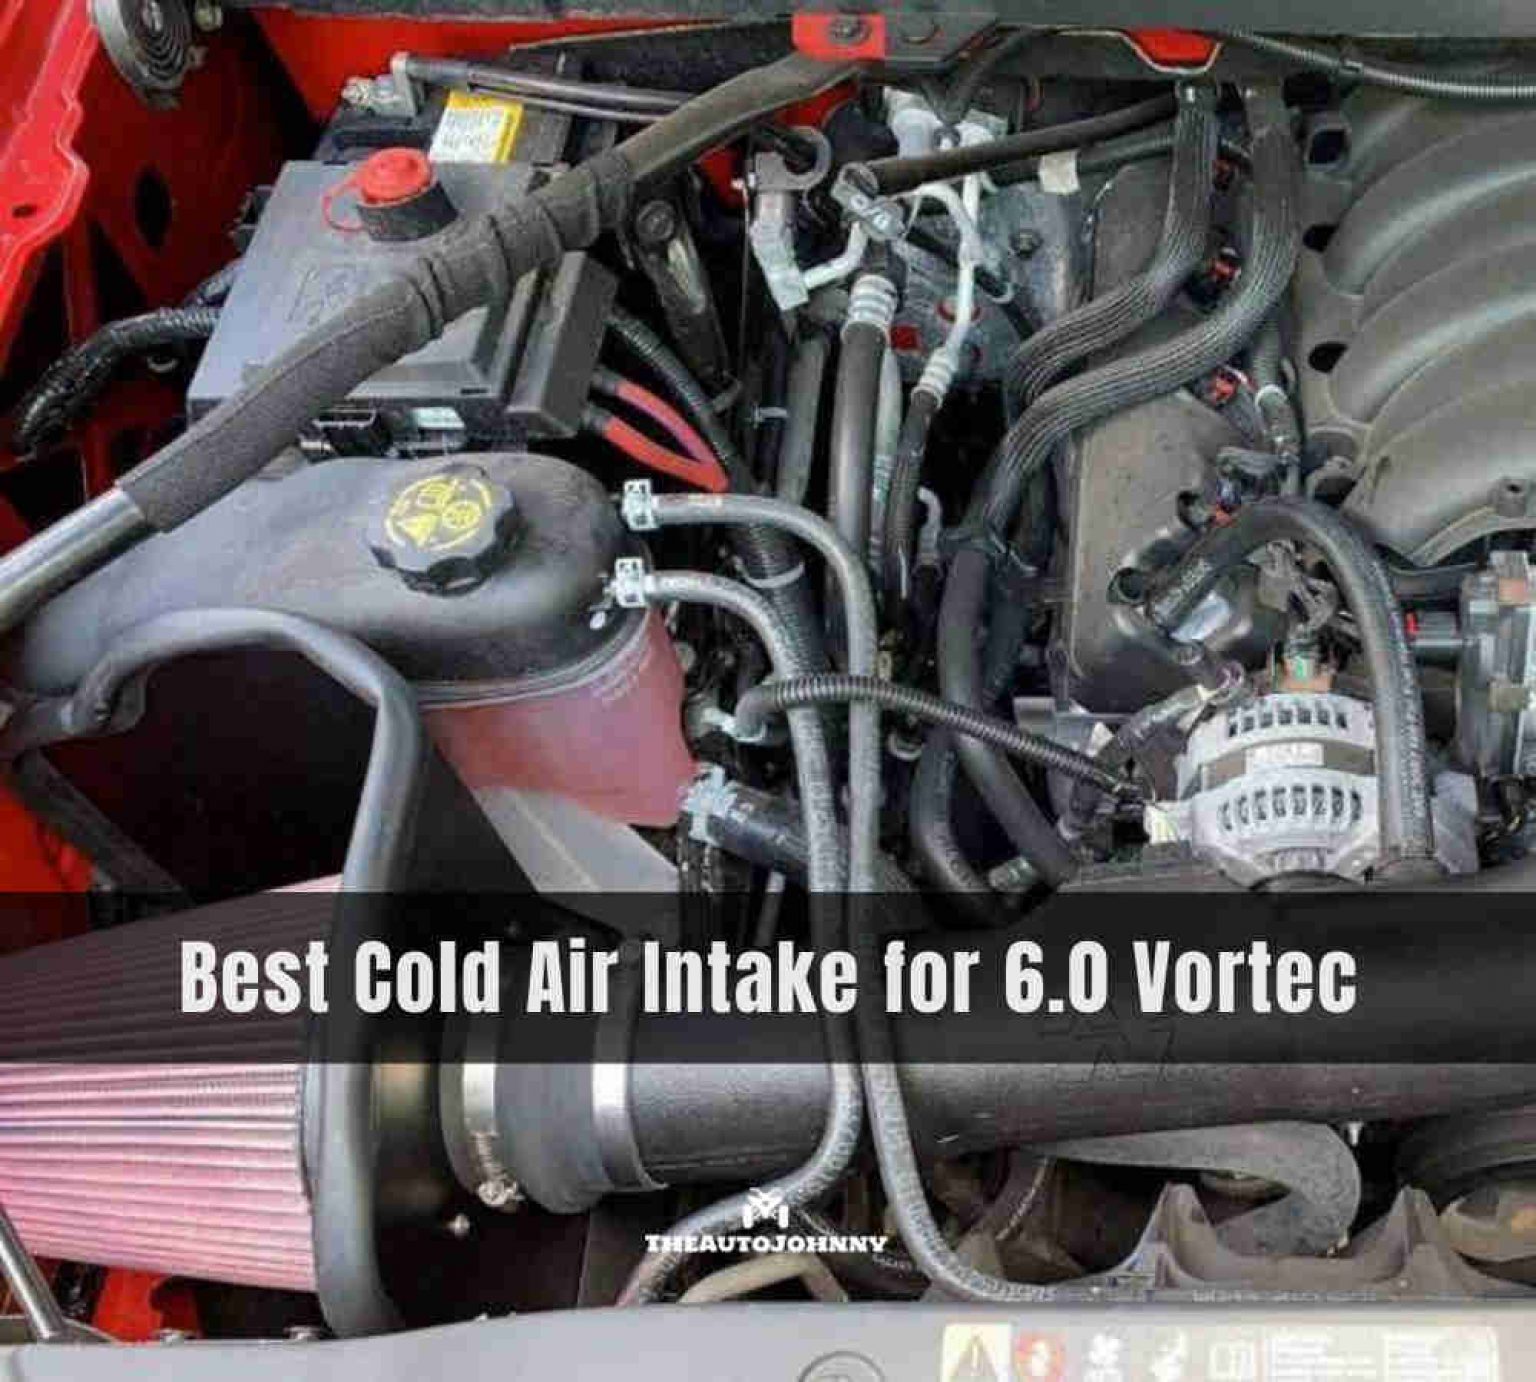 7 Best Cold Air Intake for 6.0 Vortec [Reviews & Guide 2021] Best Cold Air Intake For 6.0 Vortec